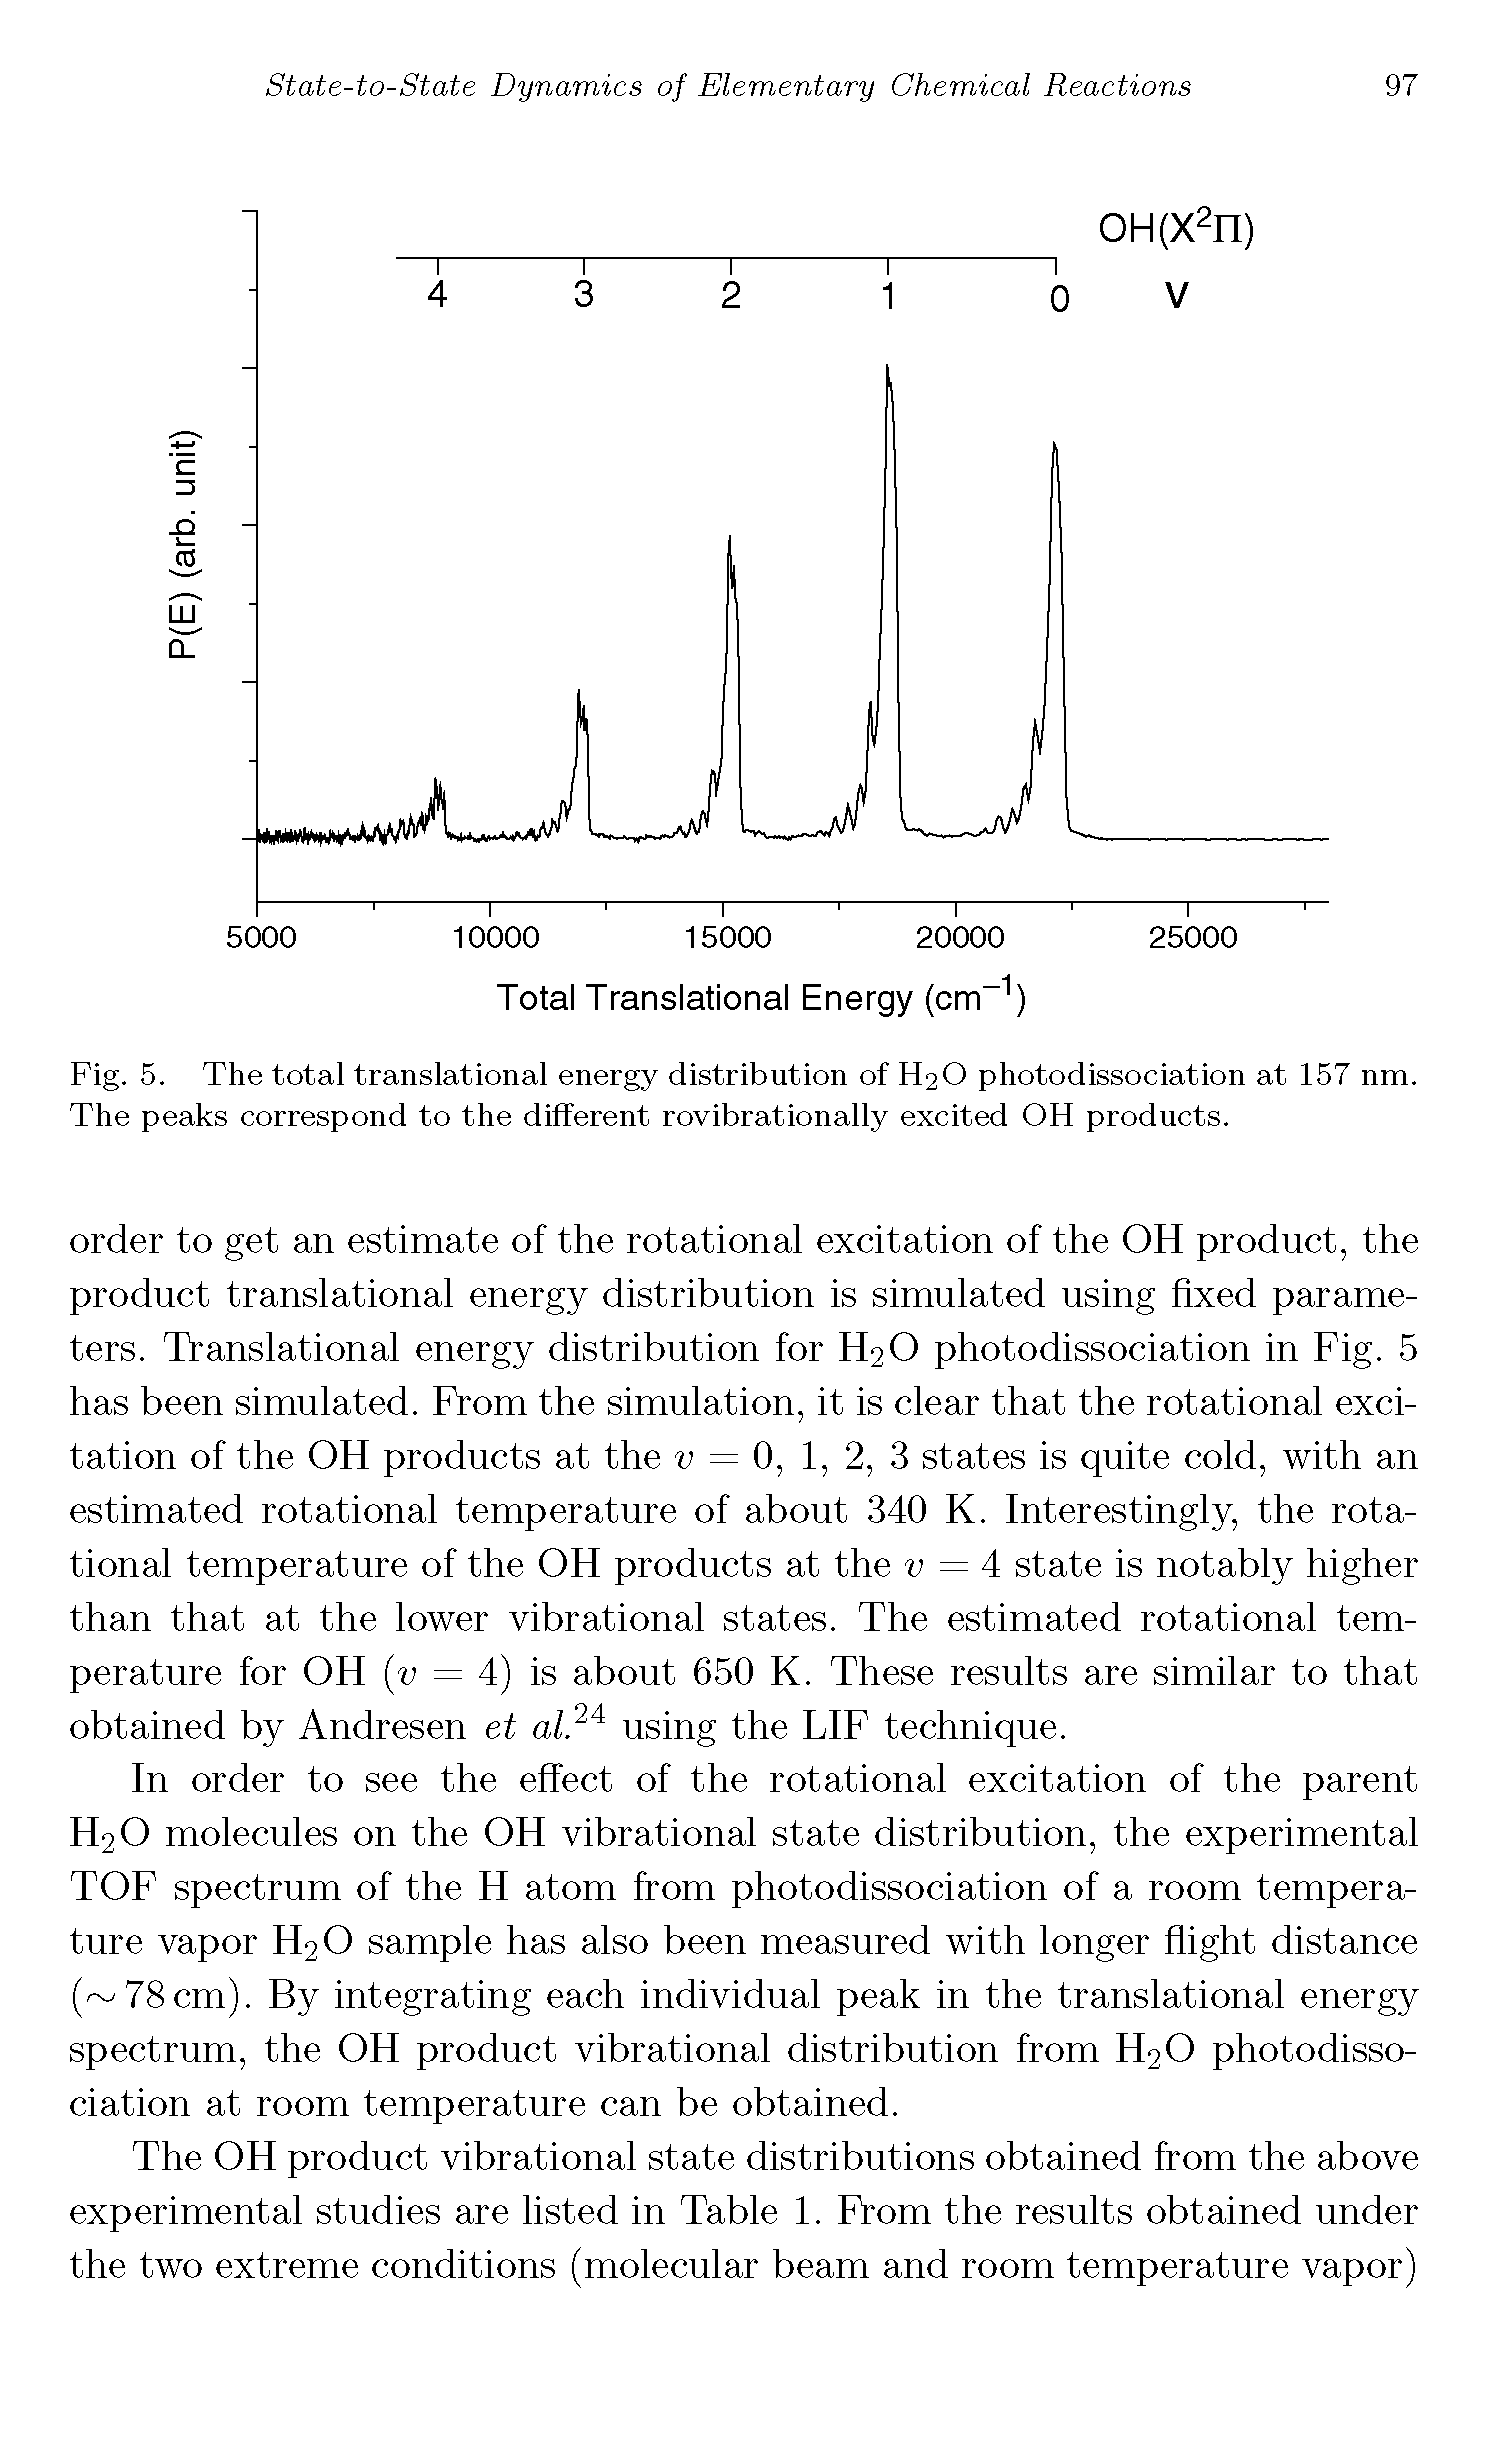 Fig. 5. The total translational energy distribution of H2O photodissociation at 157 nm. The peaks correspond to the different rovibrationally excited OH products.